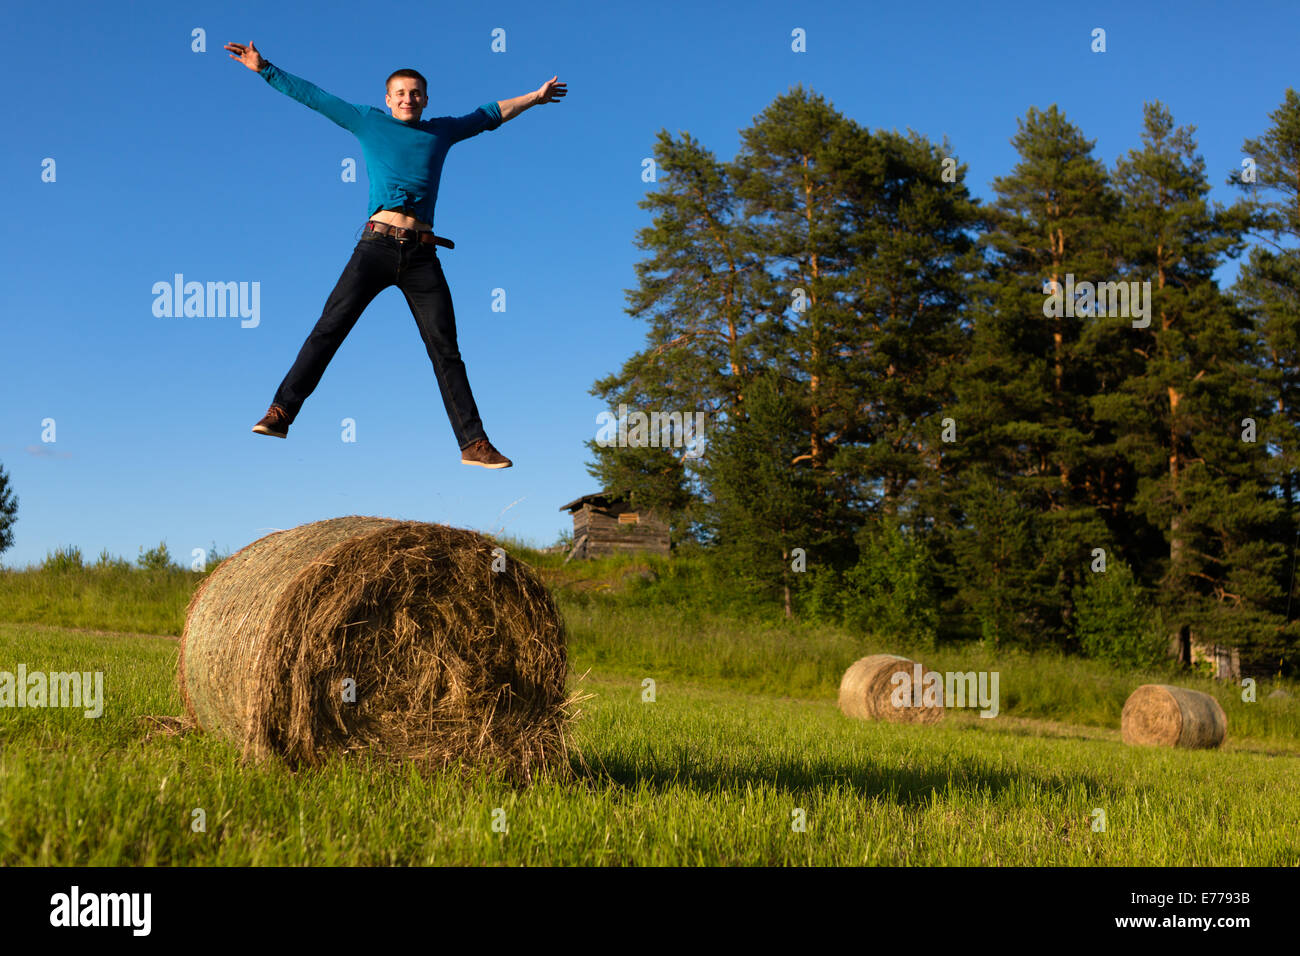 Man jumping in a field Stock Photo